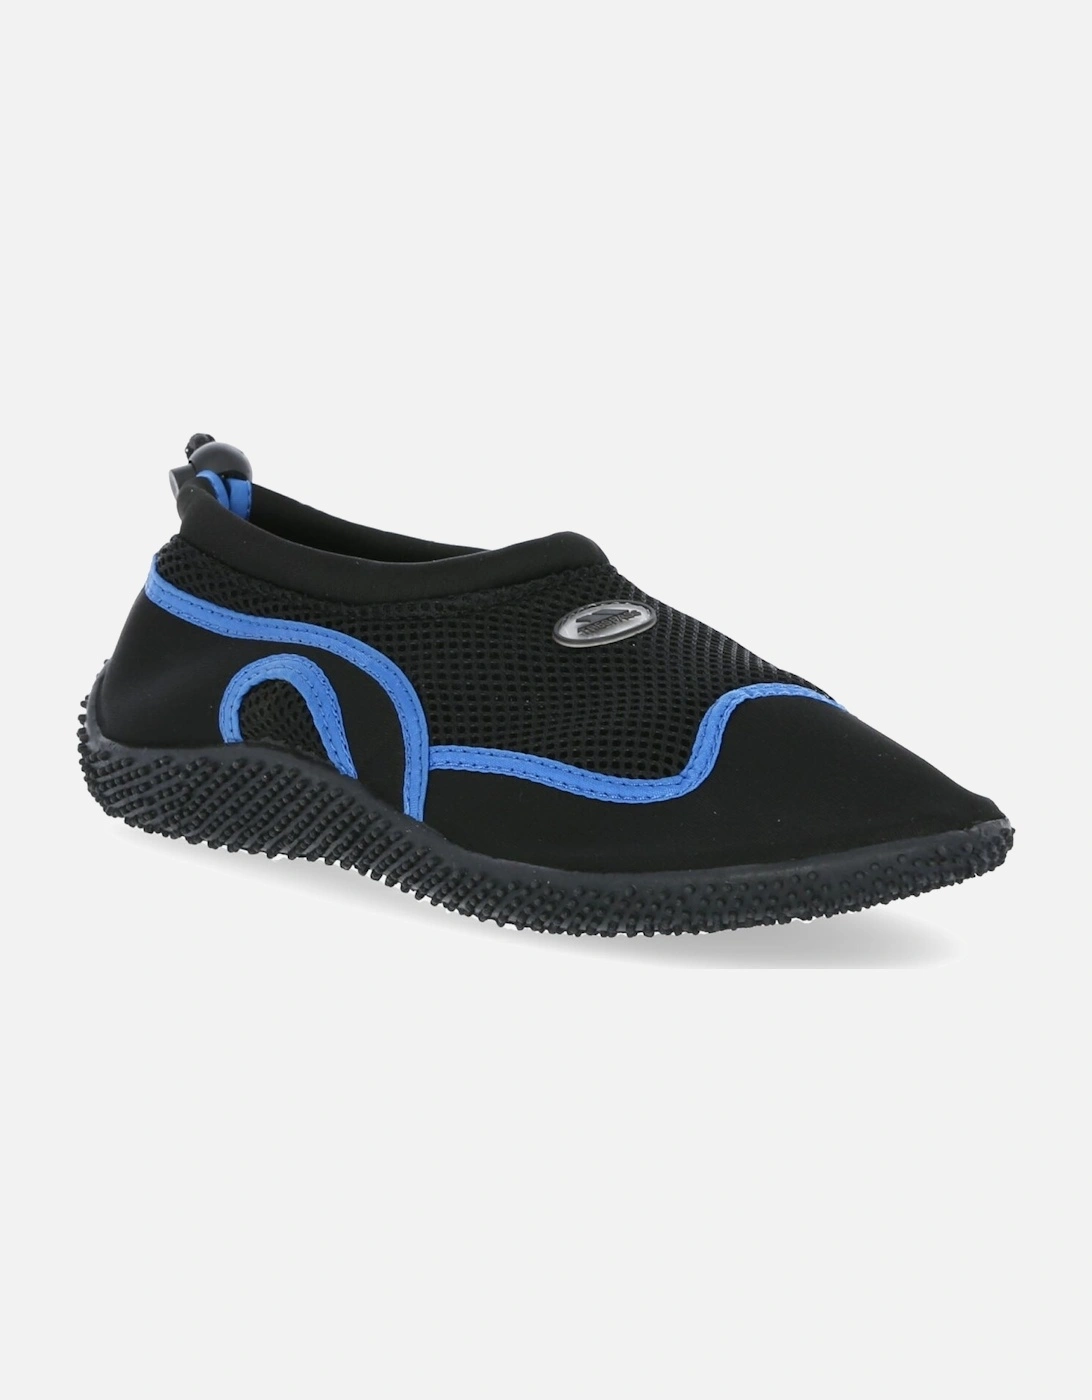 Kids Unisex Paddle Slip On Water Shoes Sandals, 14 of 13